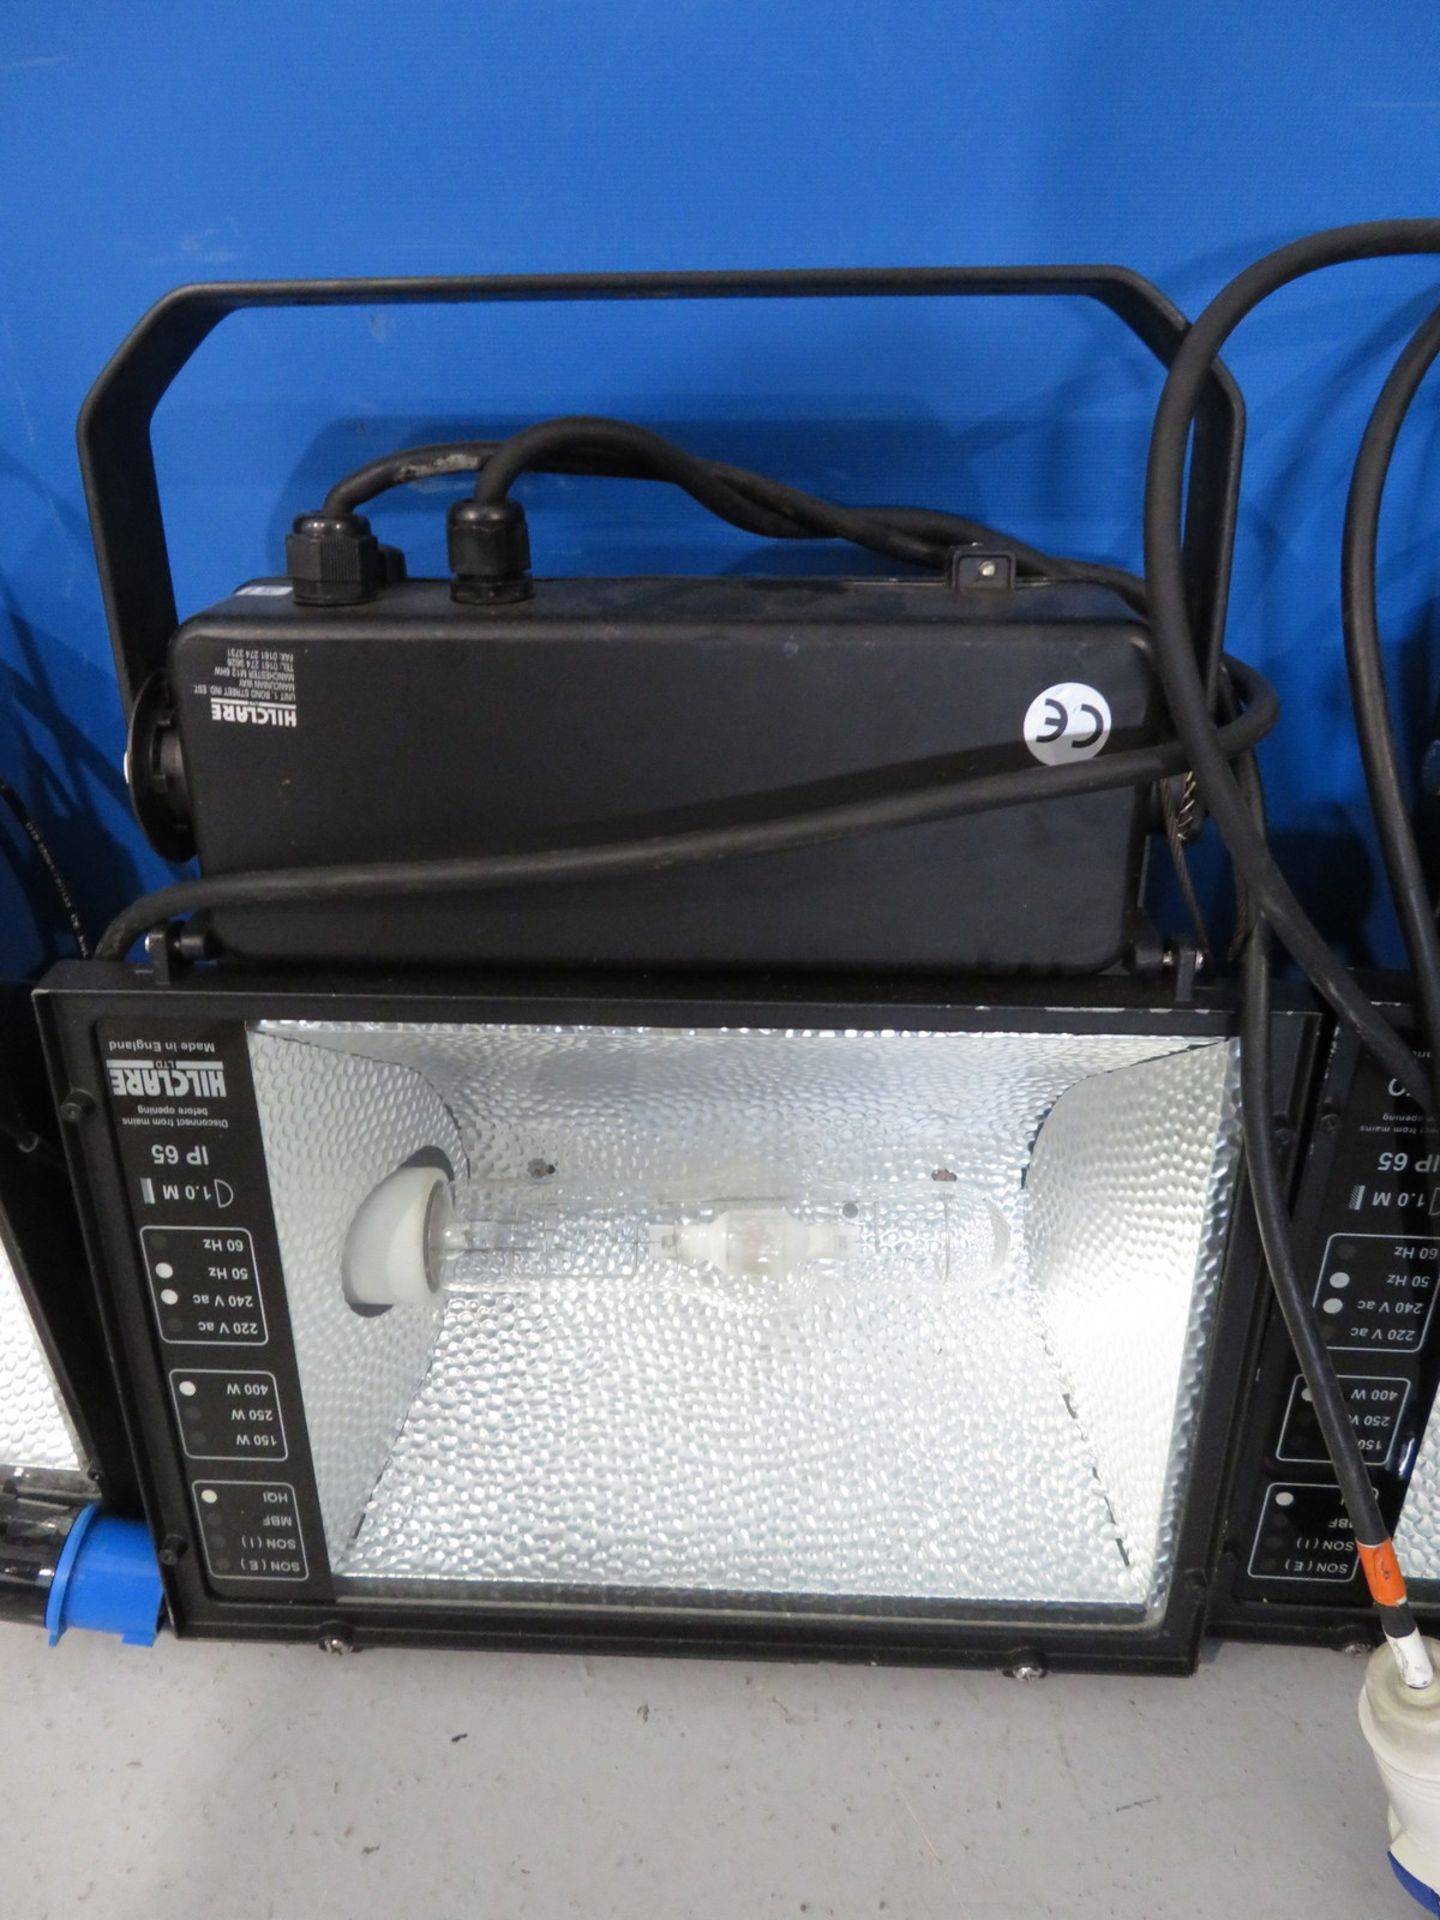 6x HQI 400w Floodlights in flight case. Includes safety bonds. Working condition. - Image 4 of 7